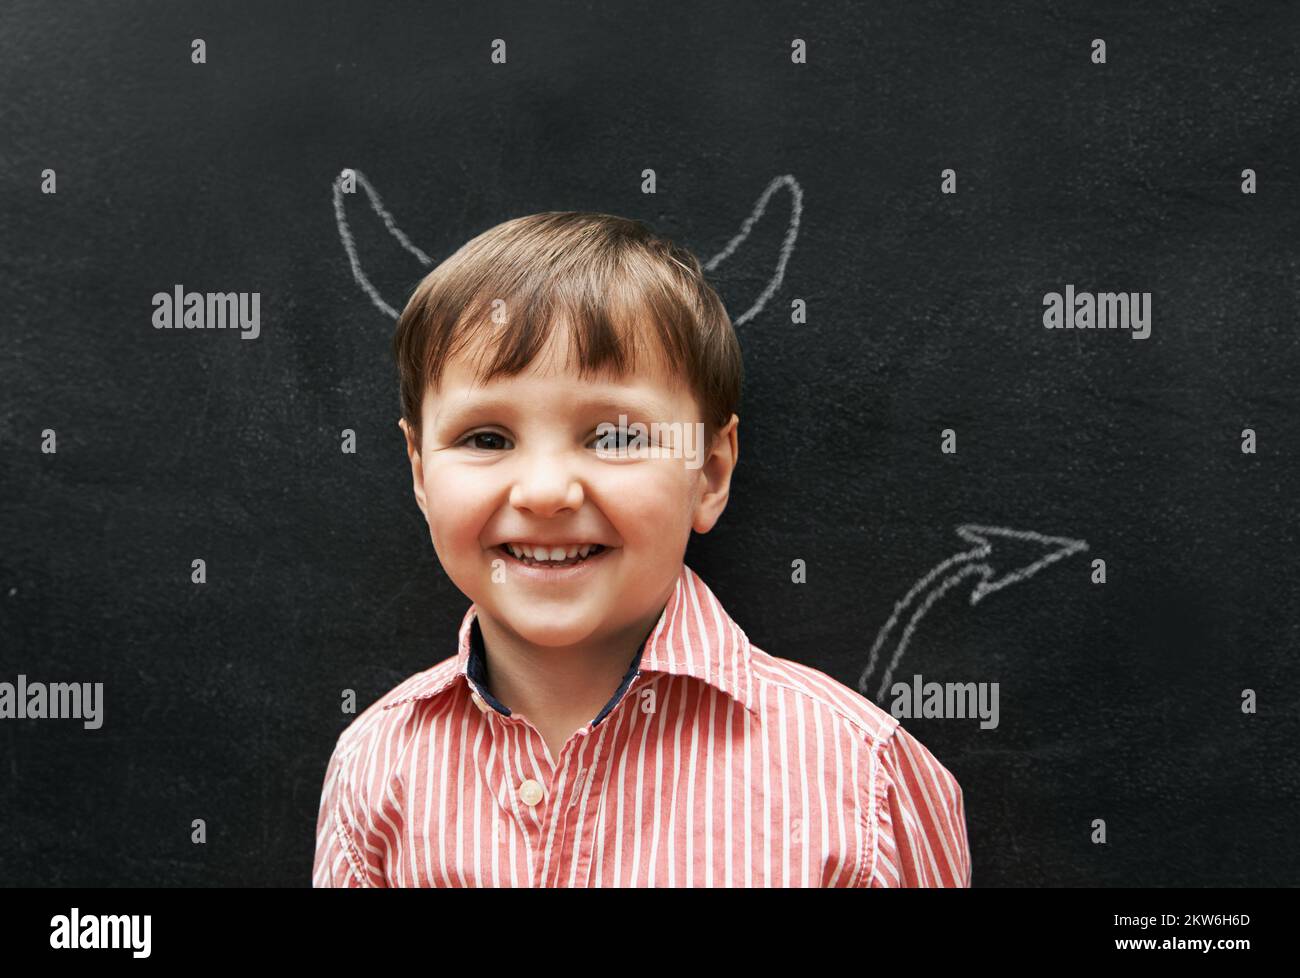 Hes a mischievous little one. Stuido portrait of a young boy with chalk-drawing horns and tail behind him. Stock Photo